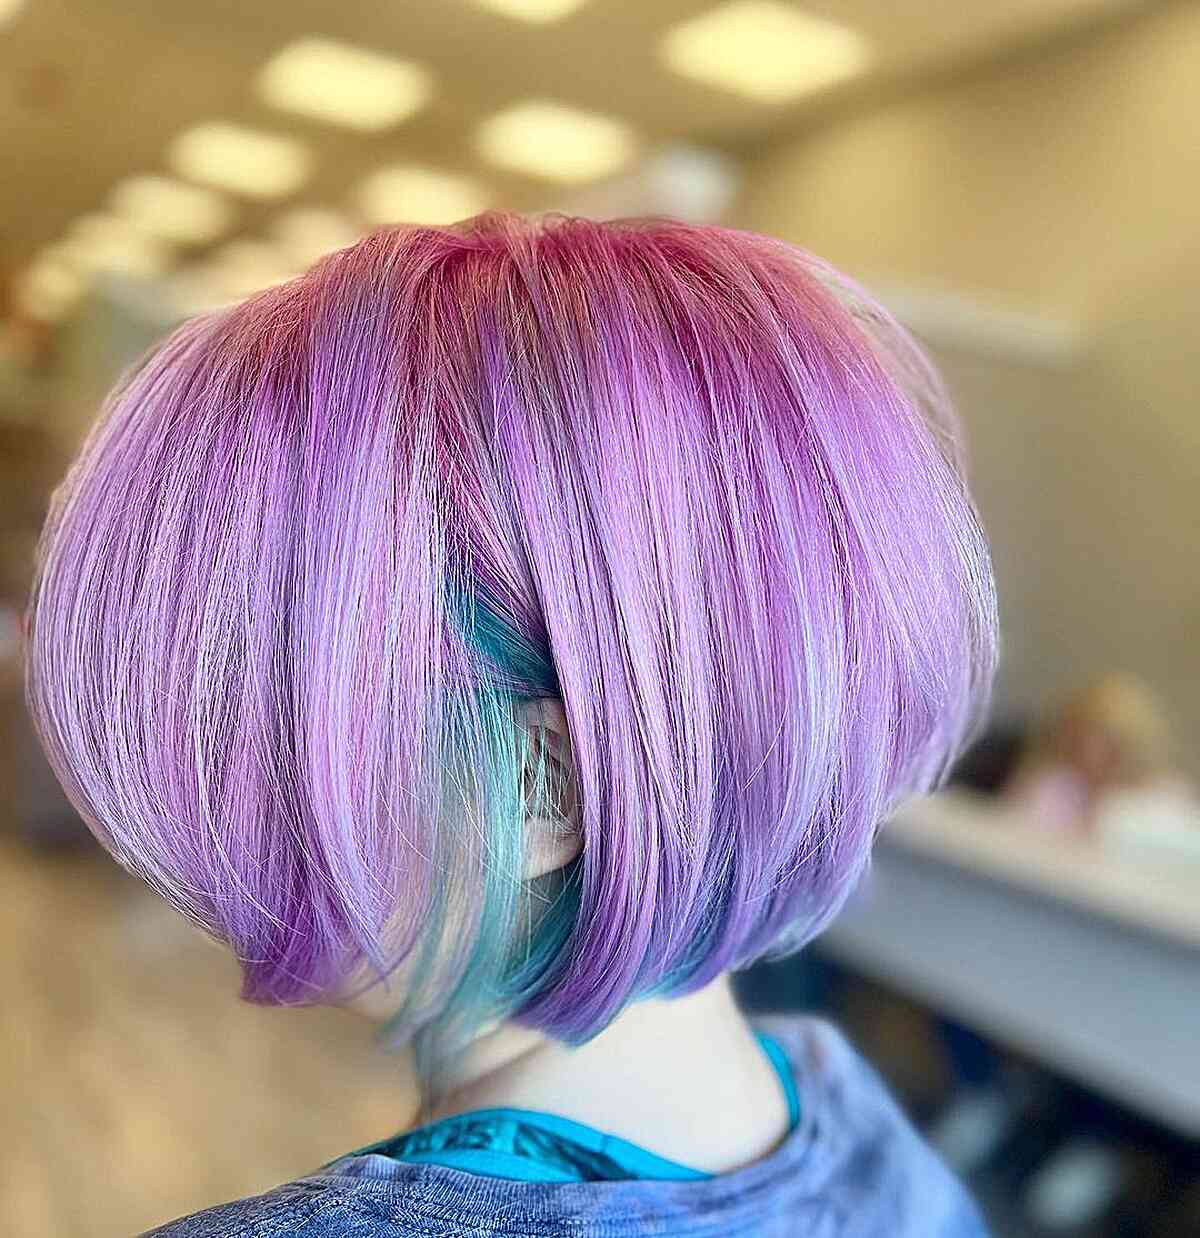 Cotton Candy Magenta Roots and Sky Blue Underlights for Short Bob